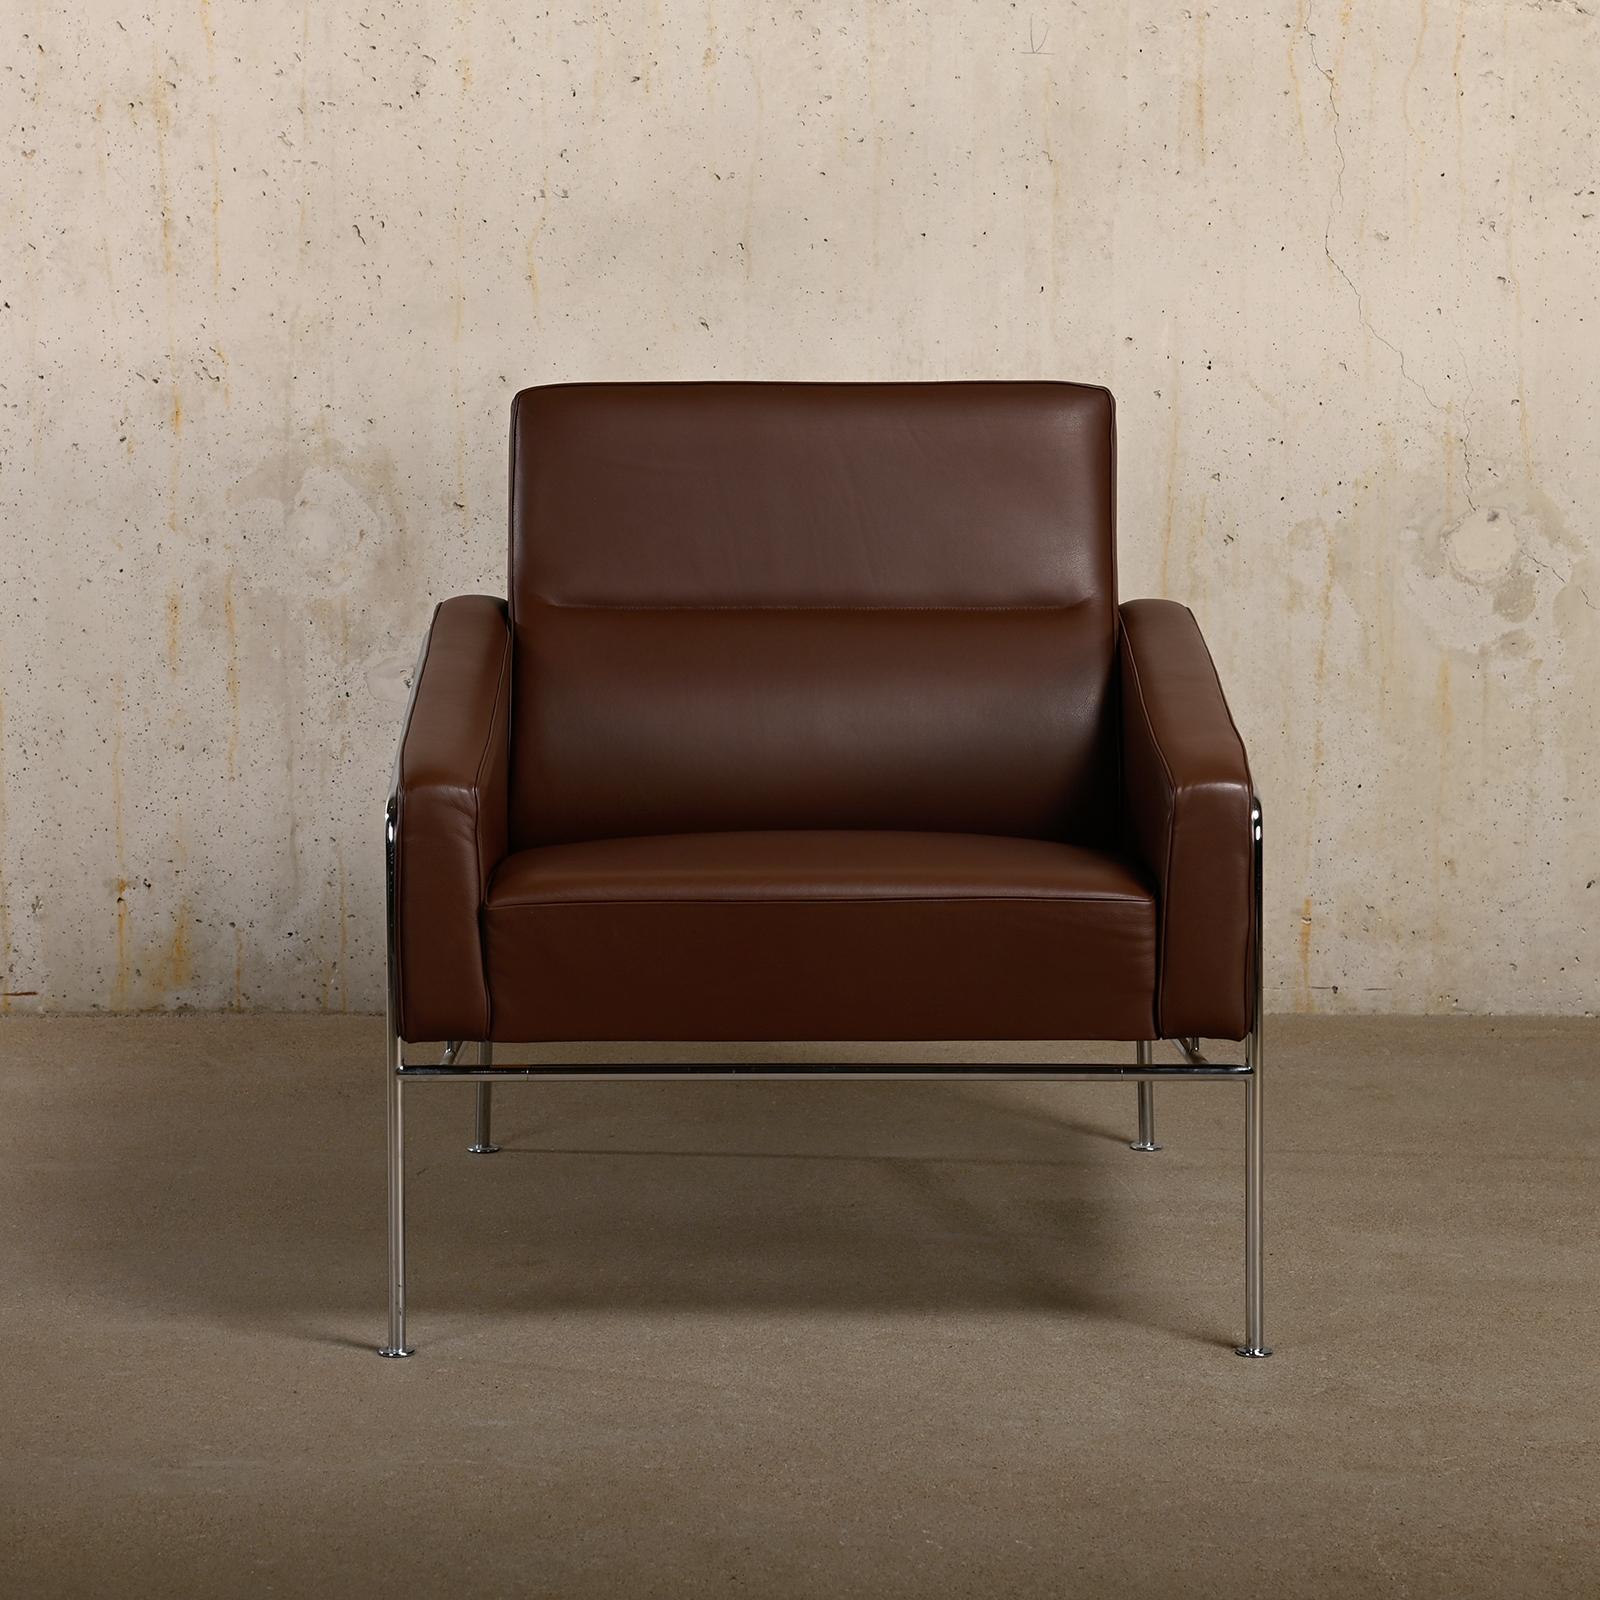 Metal Arne Jacobsen Lounge Chair 3300 Series in Chestnut leather for Fritz Hansen For Sale